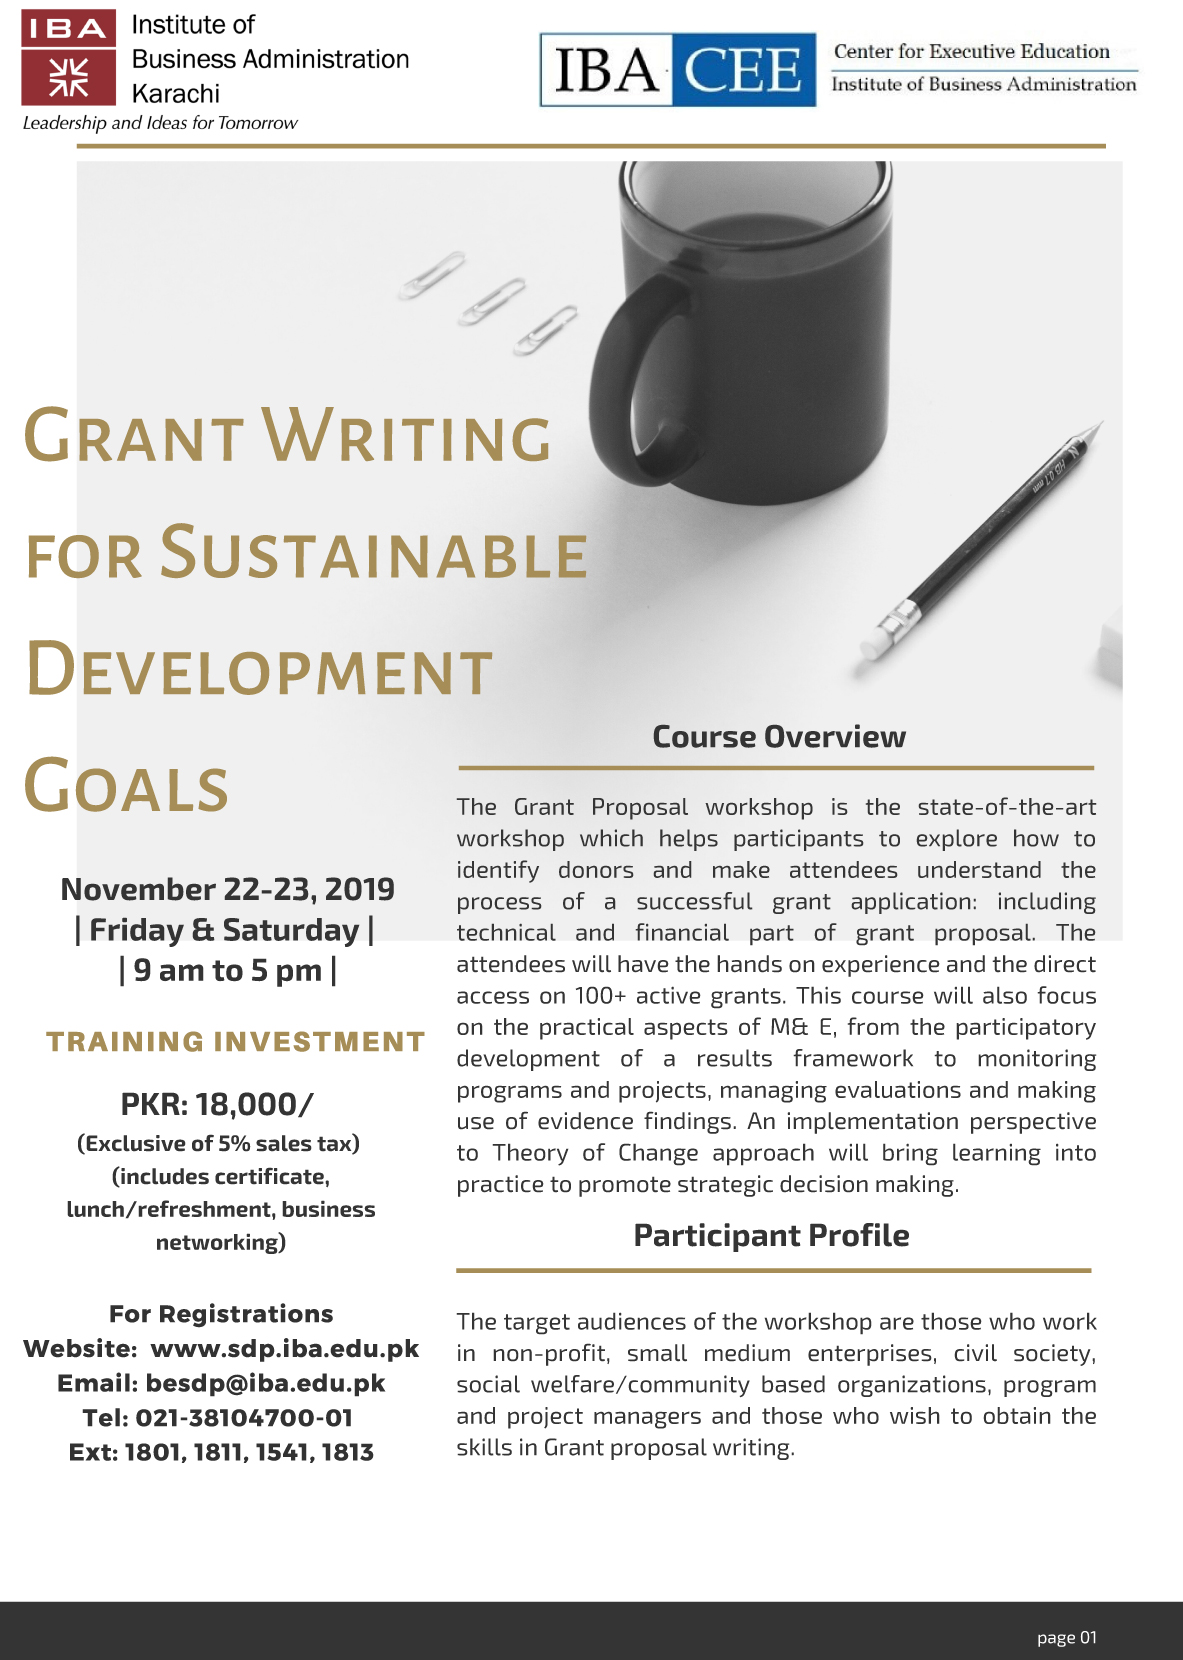 Grant Writing for Sustainable Development Goals